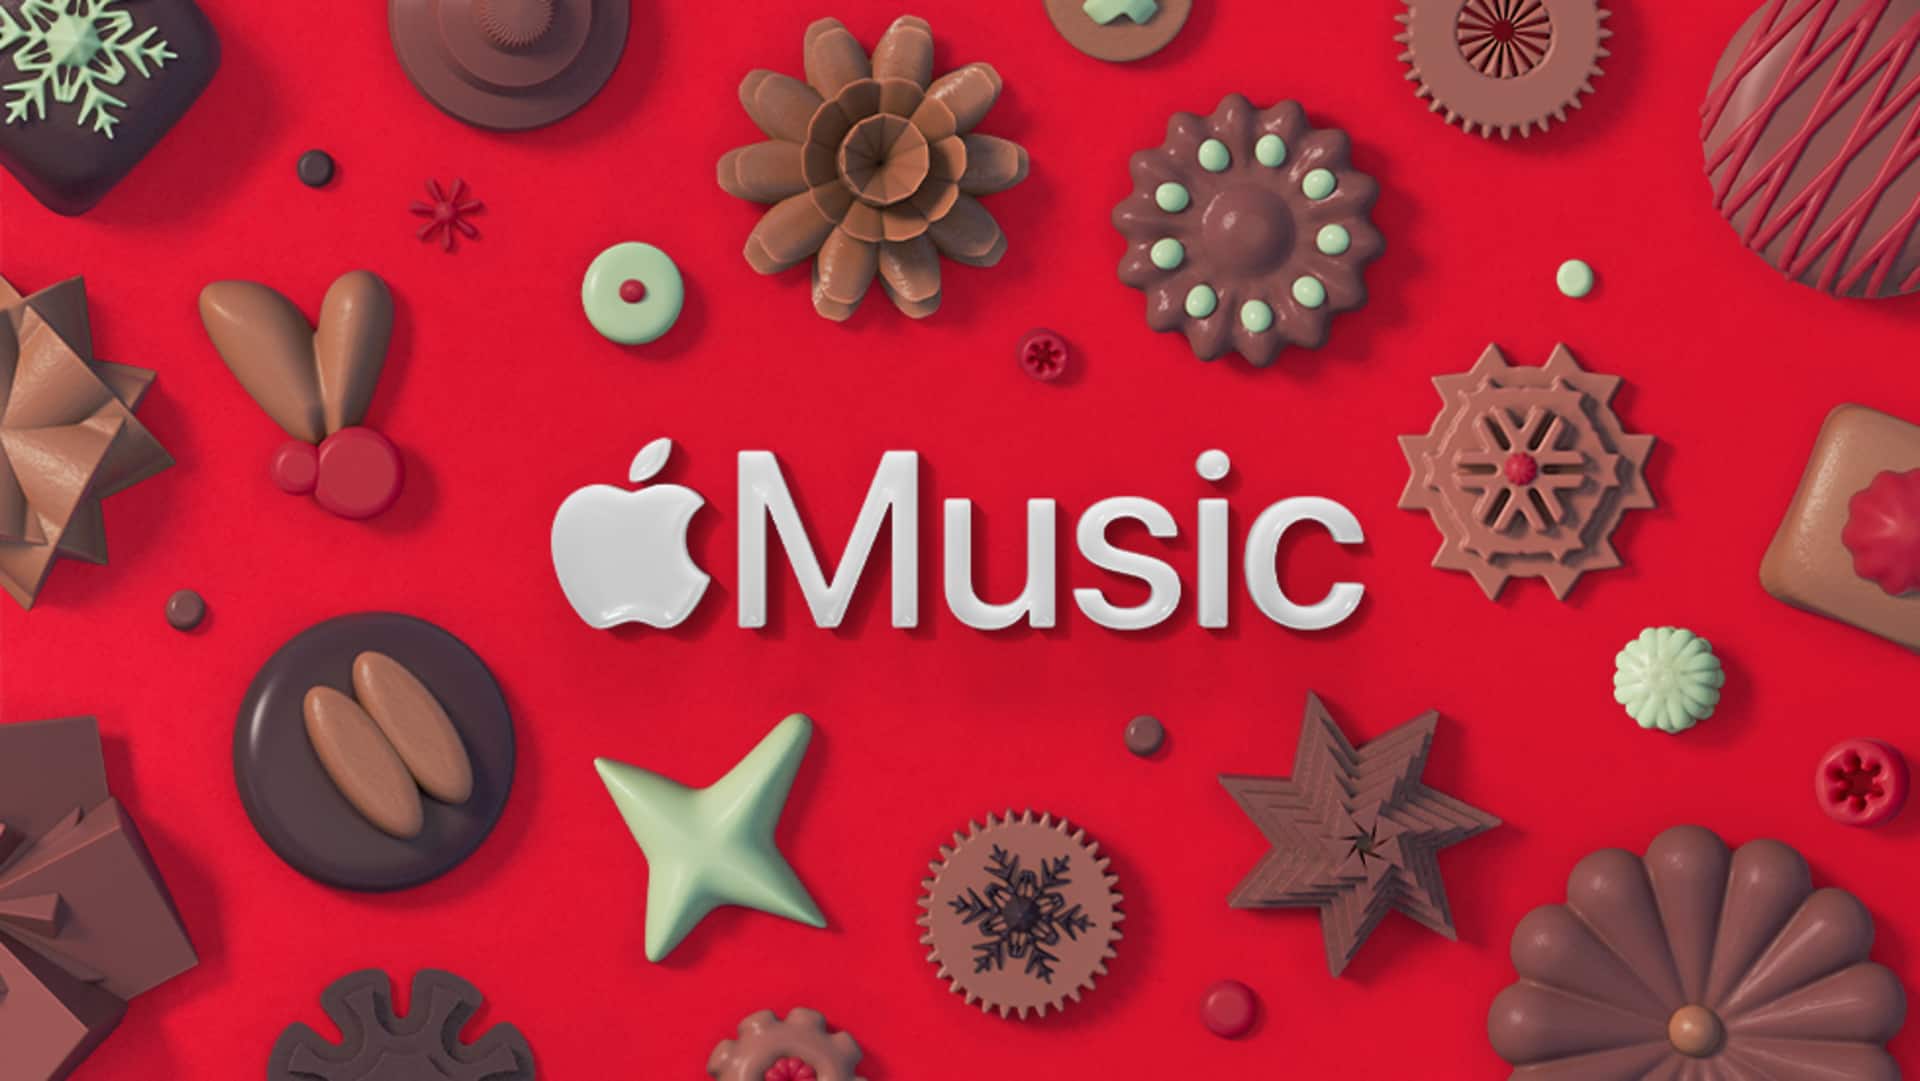 Enjoy 3 months of Apple Music for free: Here's how